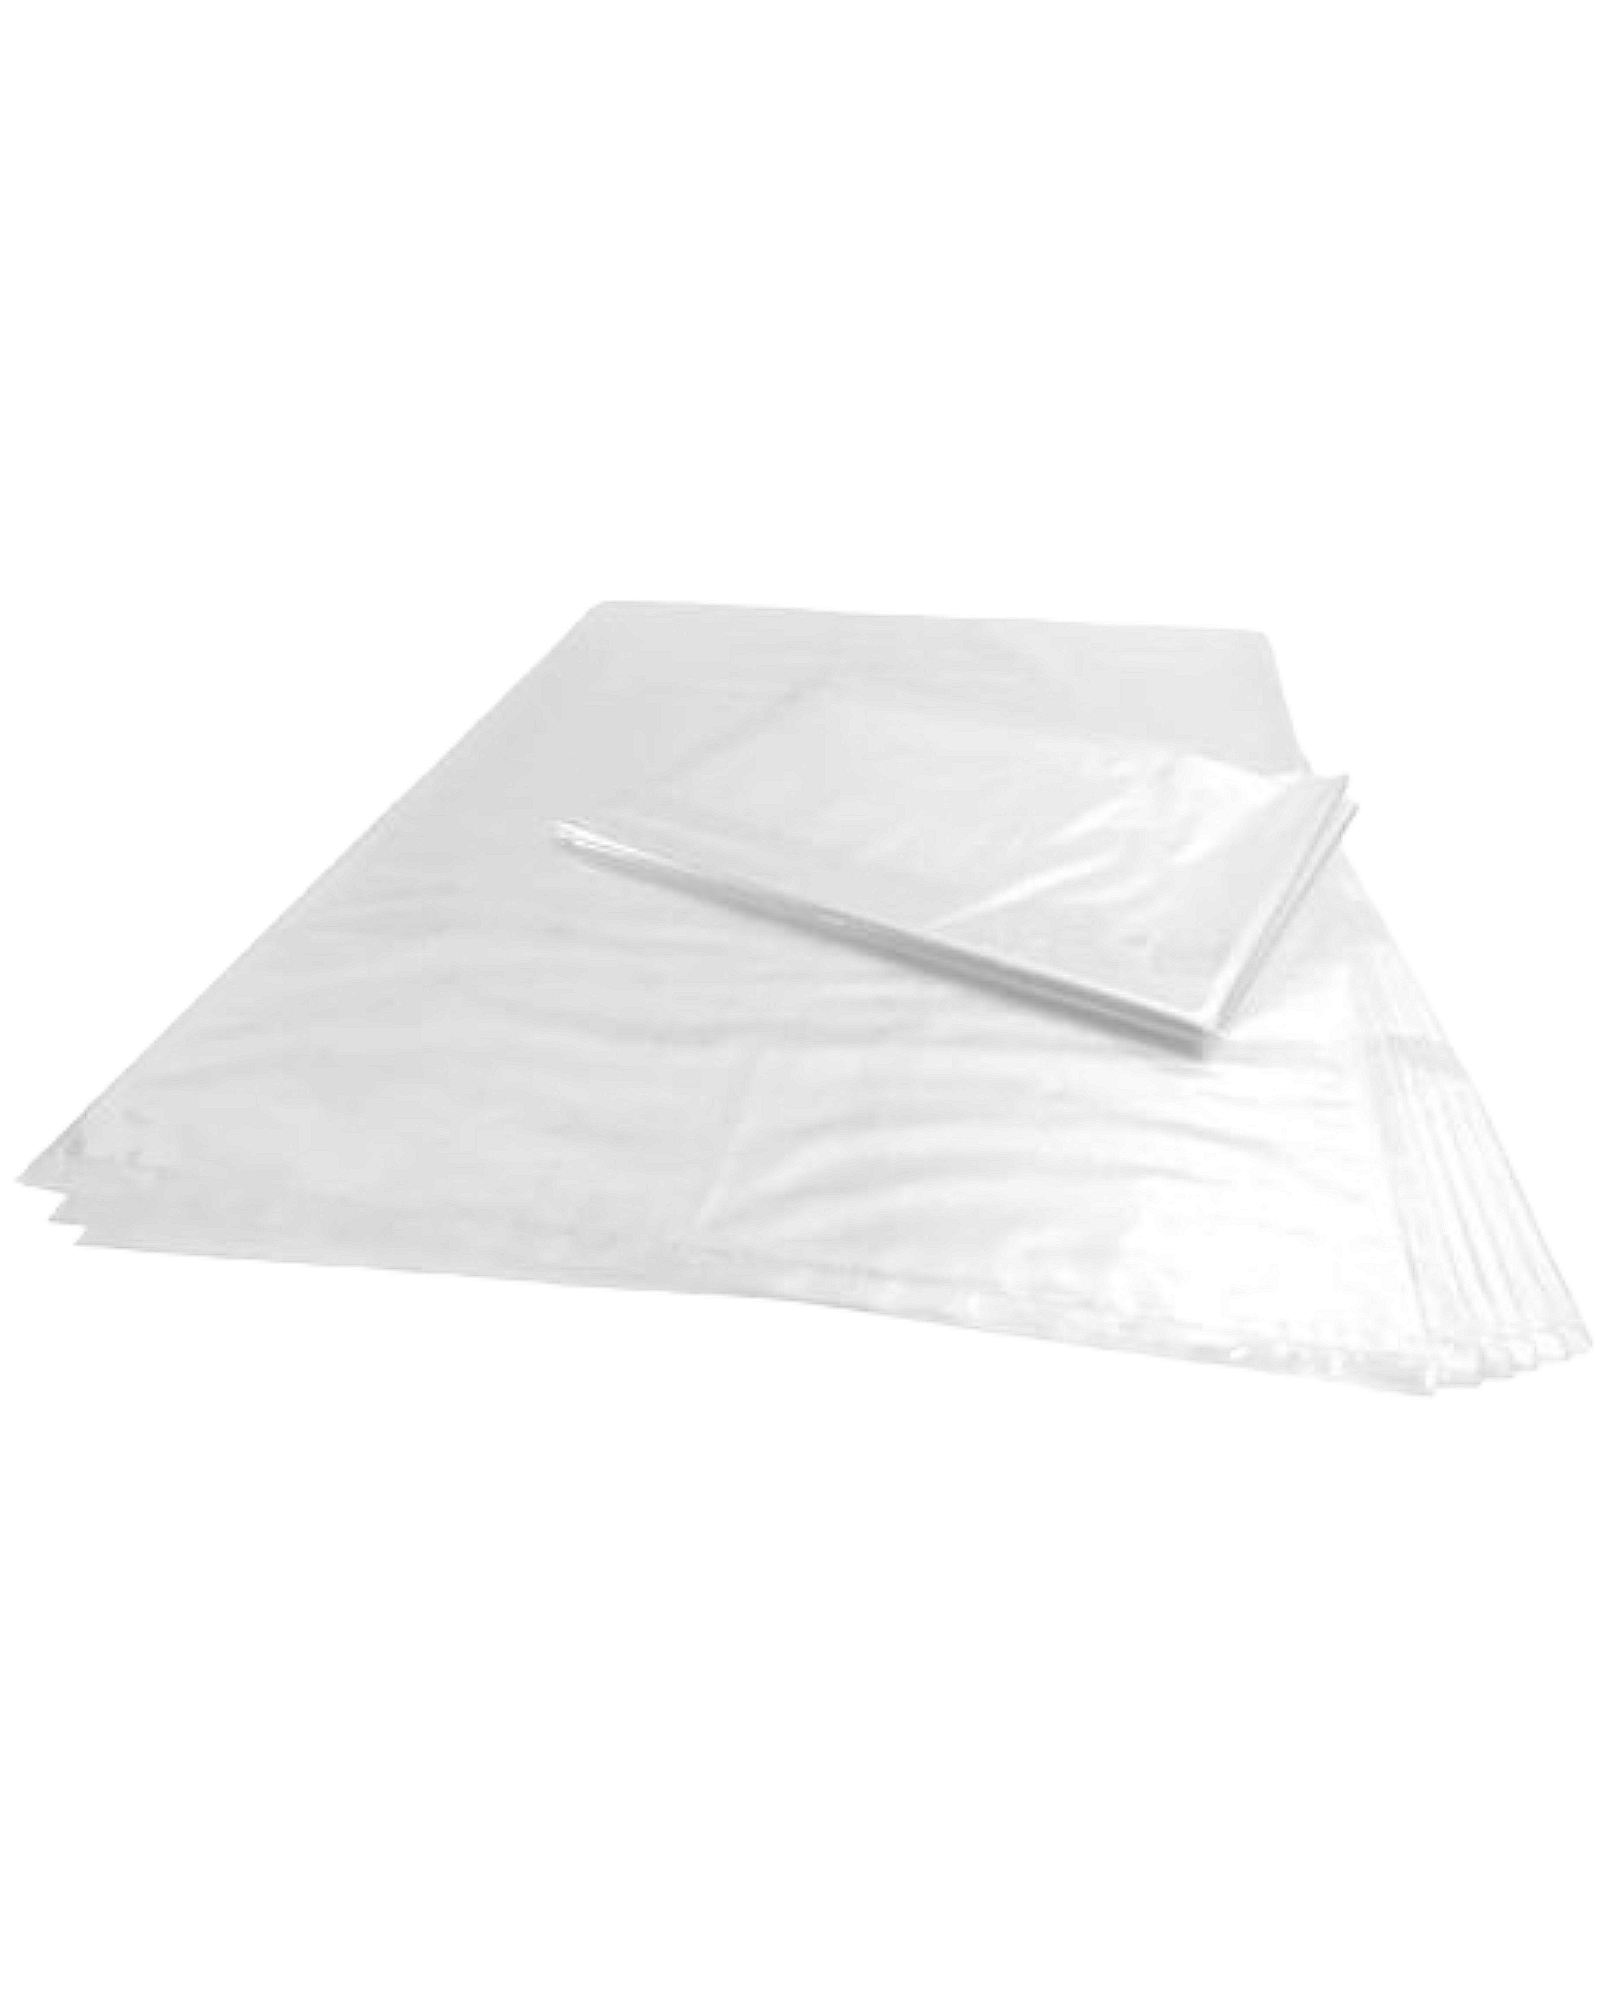 Refuse Bags 75x95cm 50microns Clear Plastic 100pack